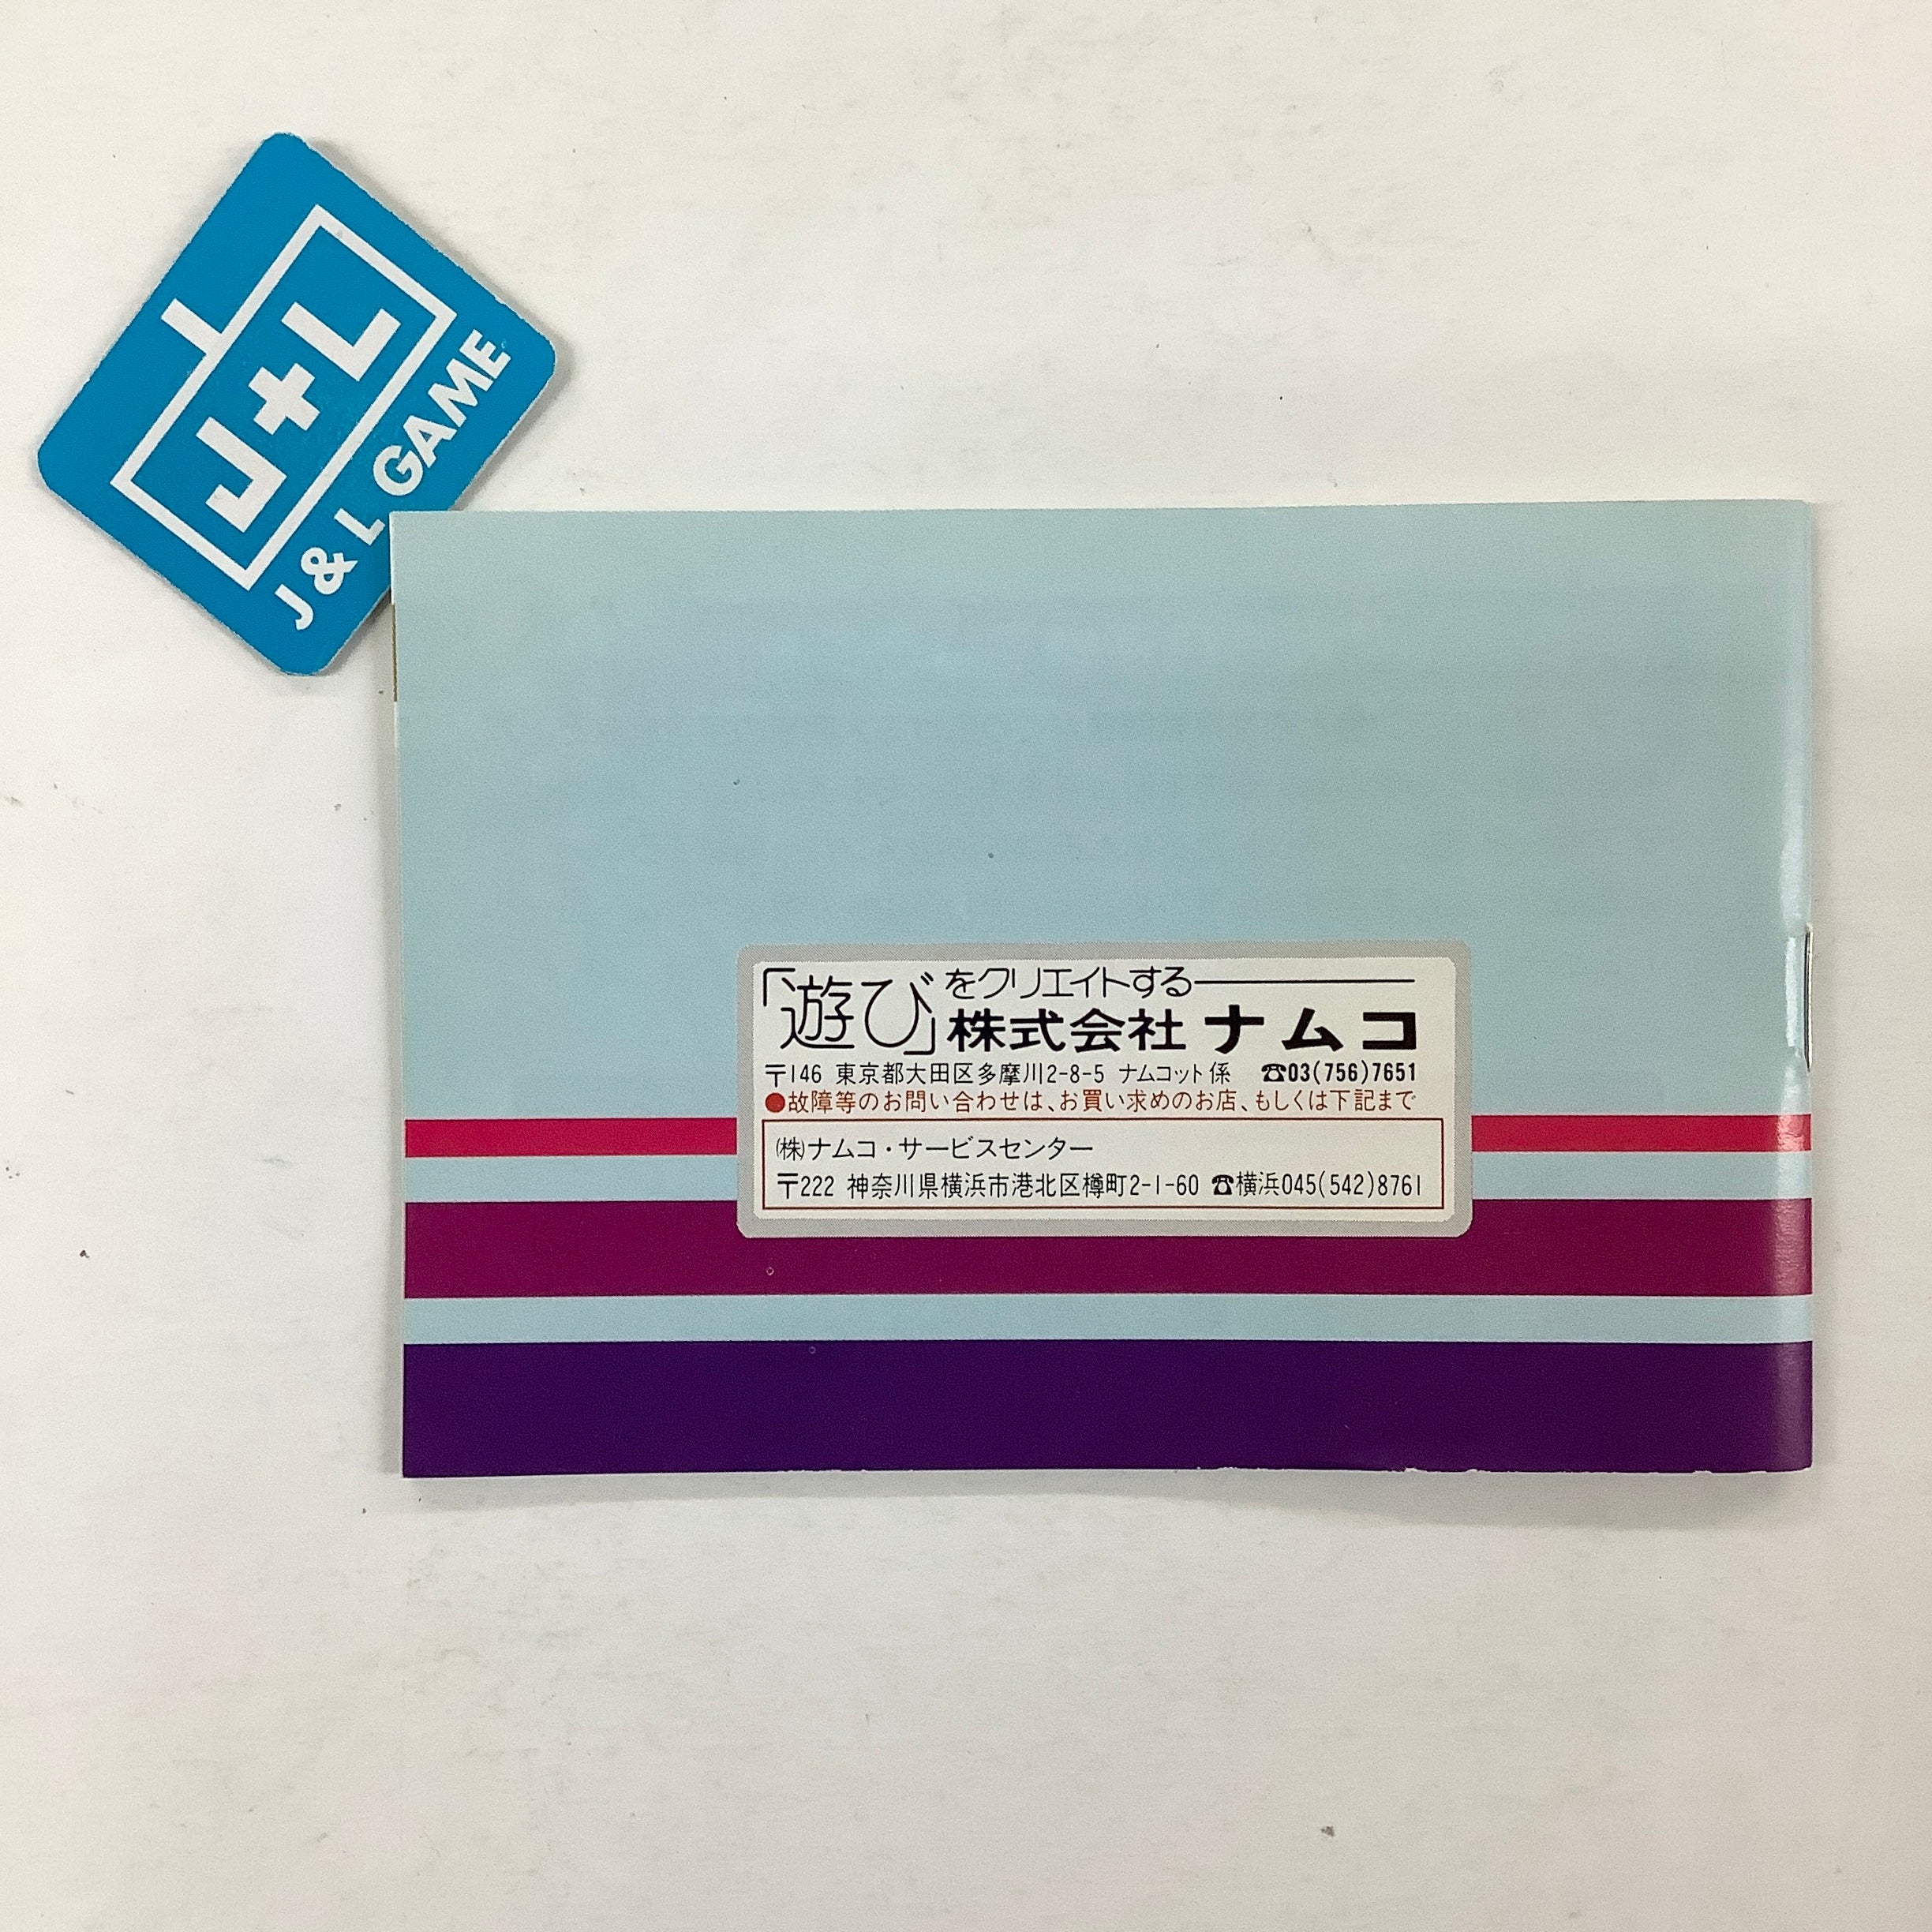 Star Wars - (FC) Nintendo Famicom [Pre-Owned] (Japanese Import) Video Games Namco   